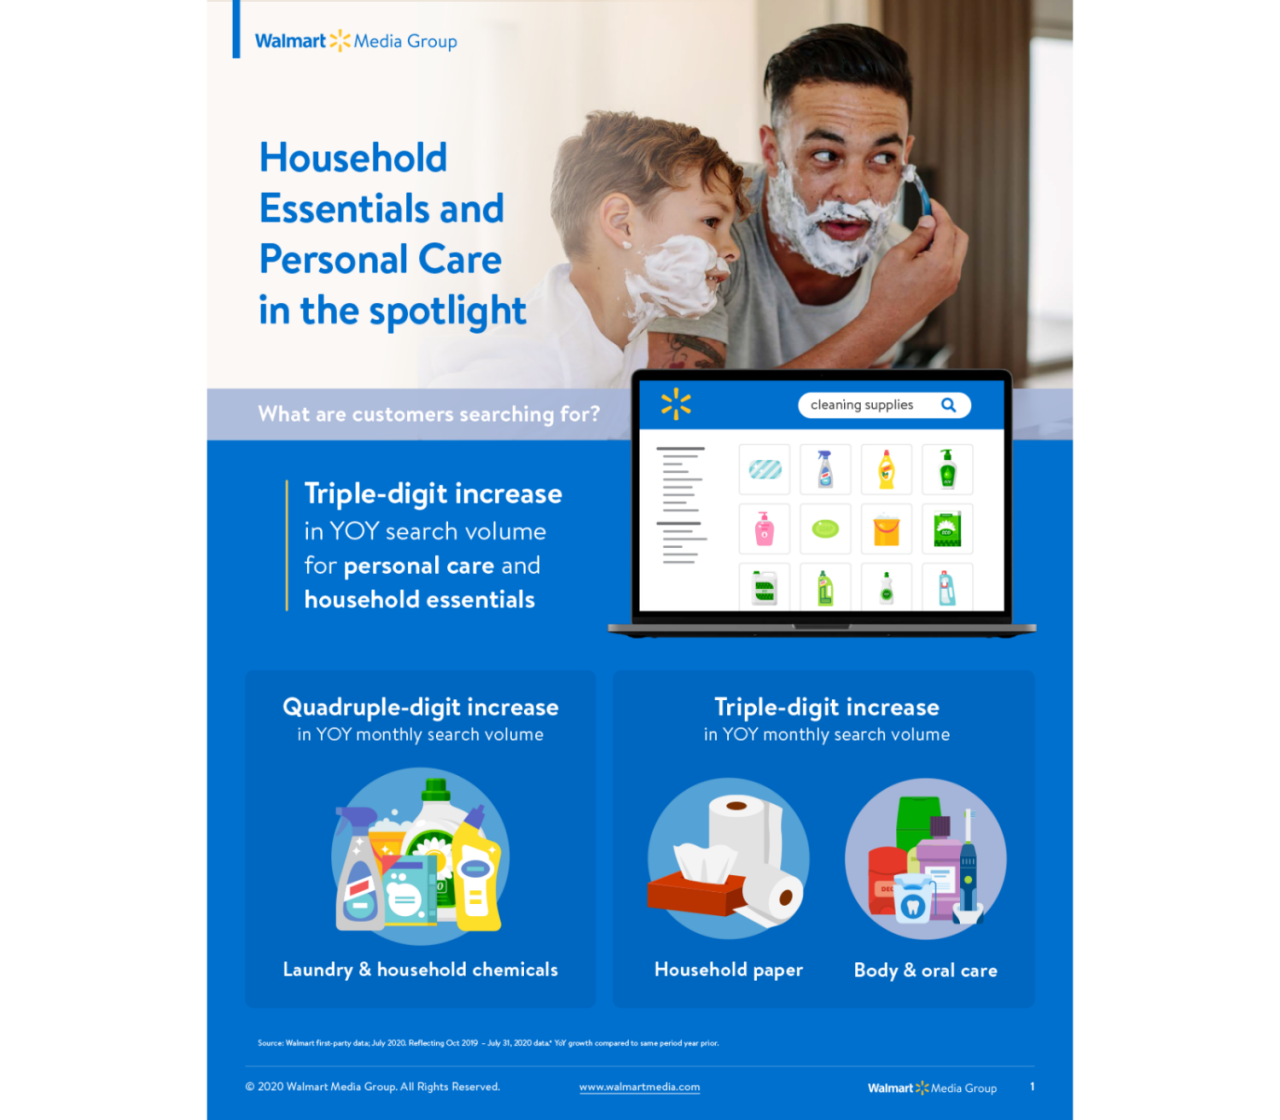 walmart-customer-insights-household-essentials-personal-care-1